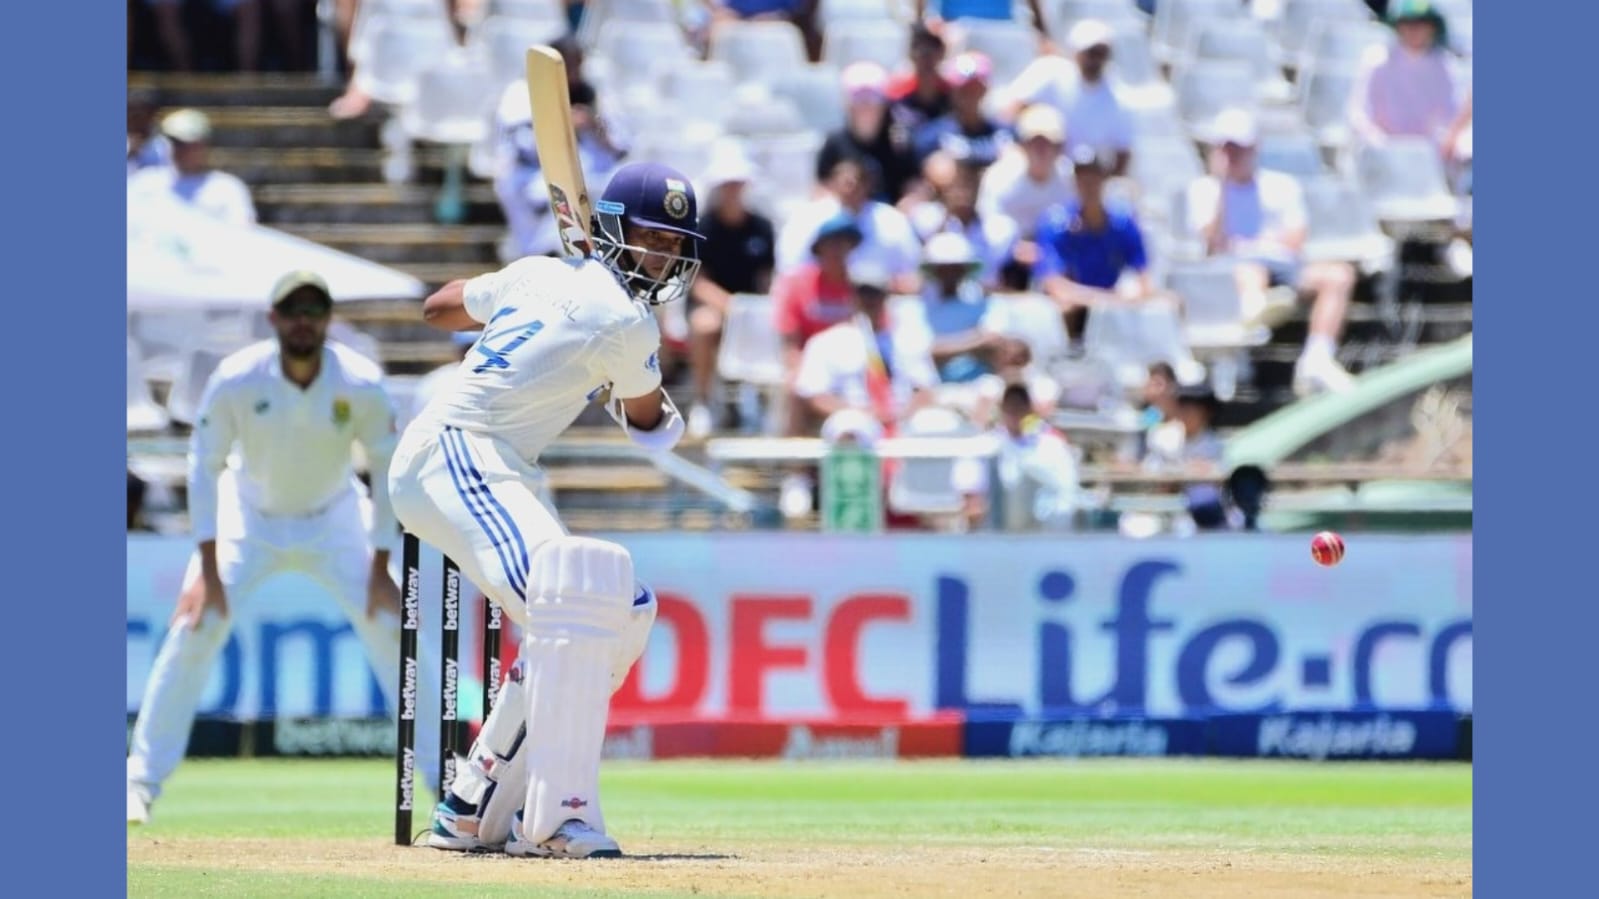 “Valuable lessons”: Yashasvi Jaiswal on India’s win over South Africa in 2nd Test